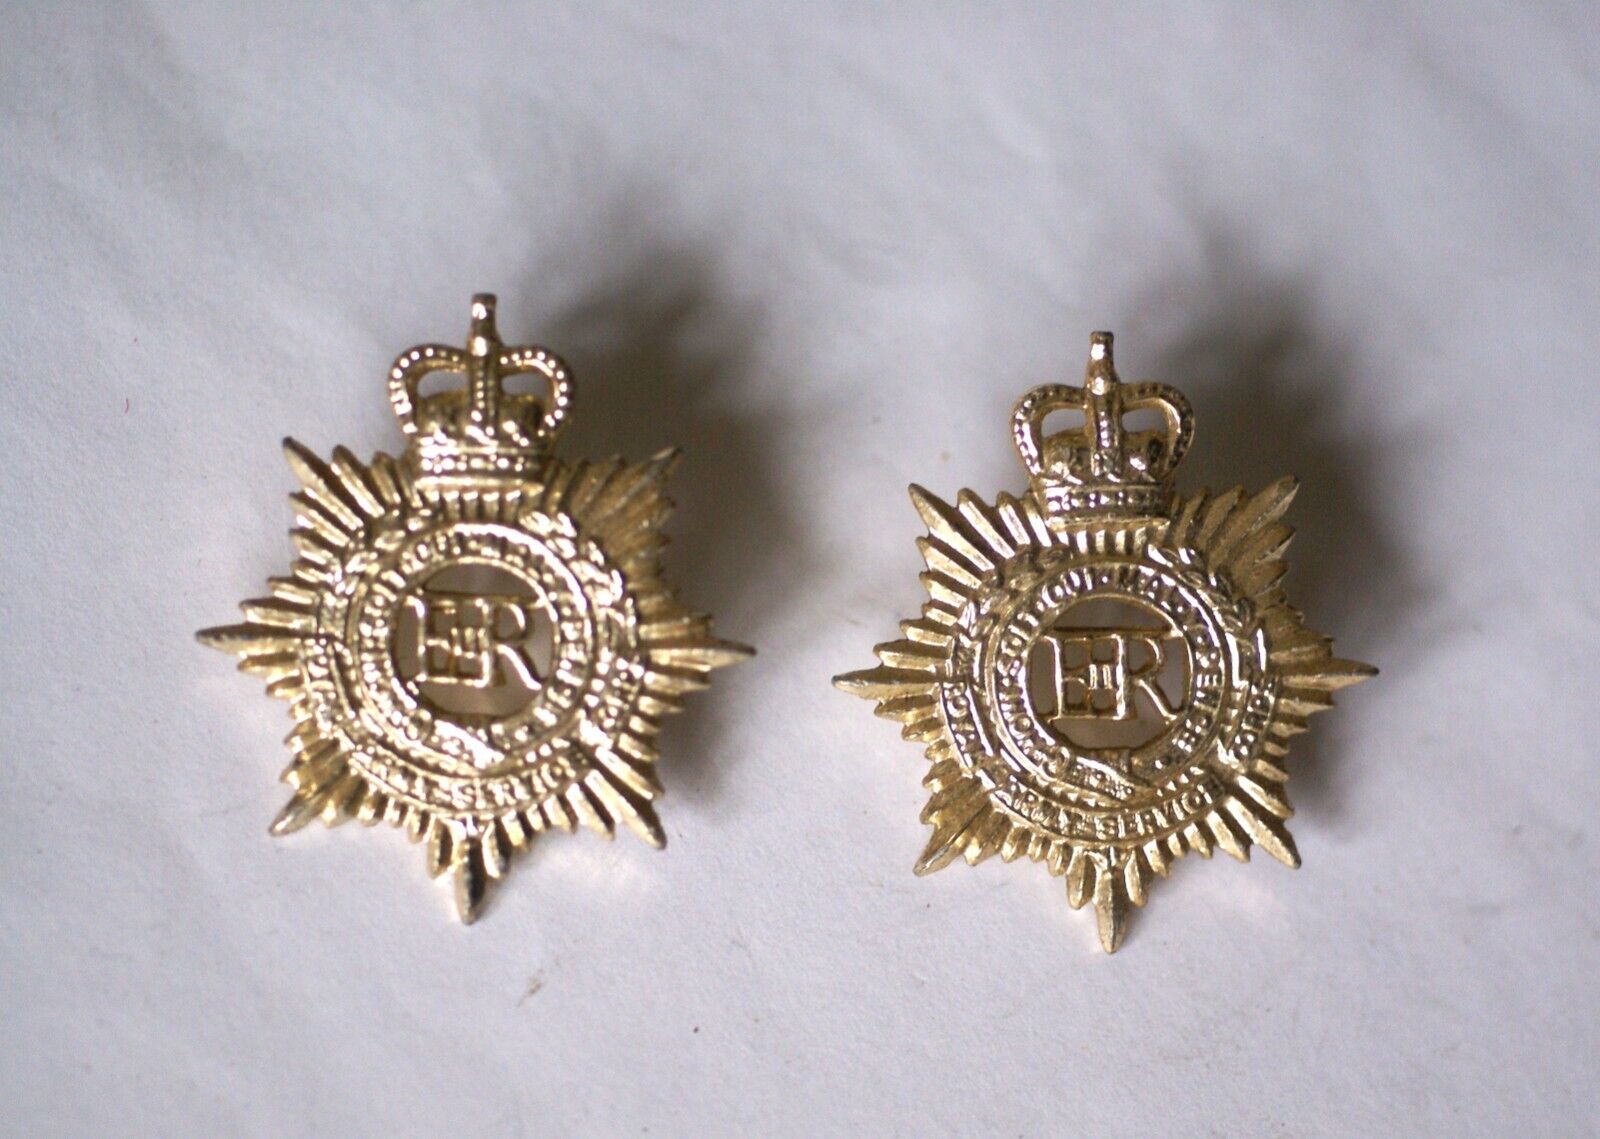 British Royal Army Service Corps collar badges, obsolete since 1965